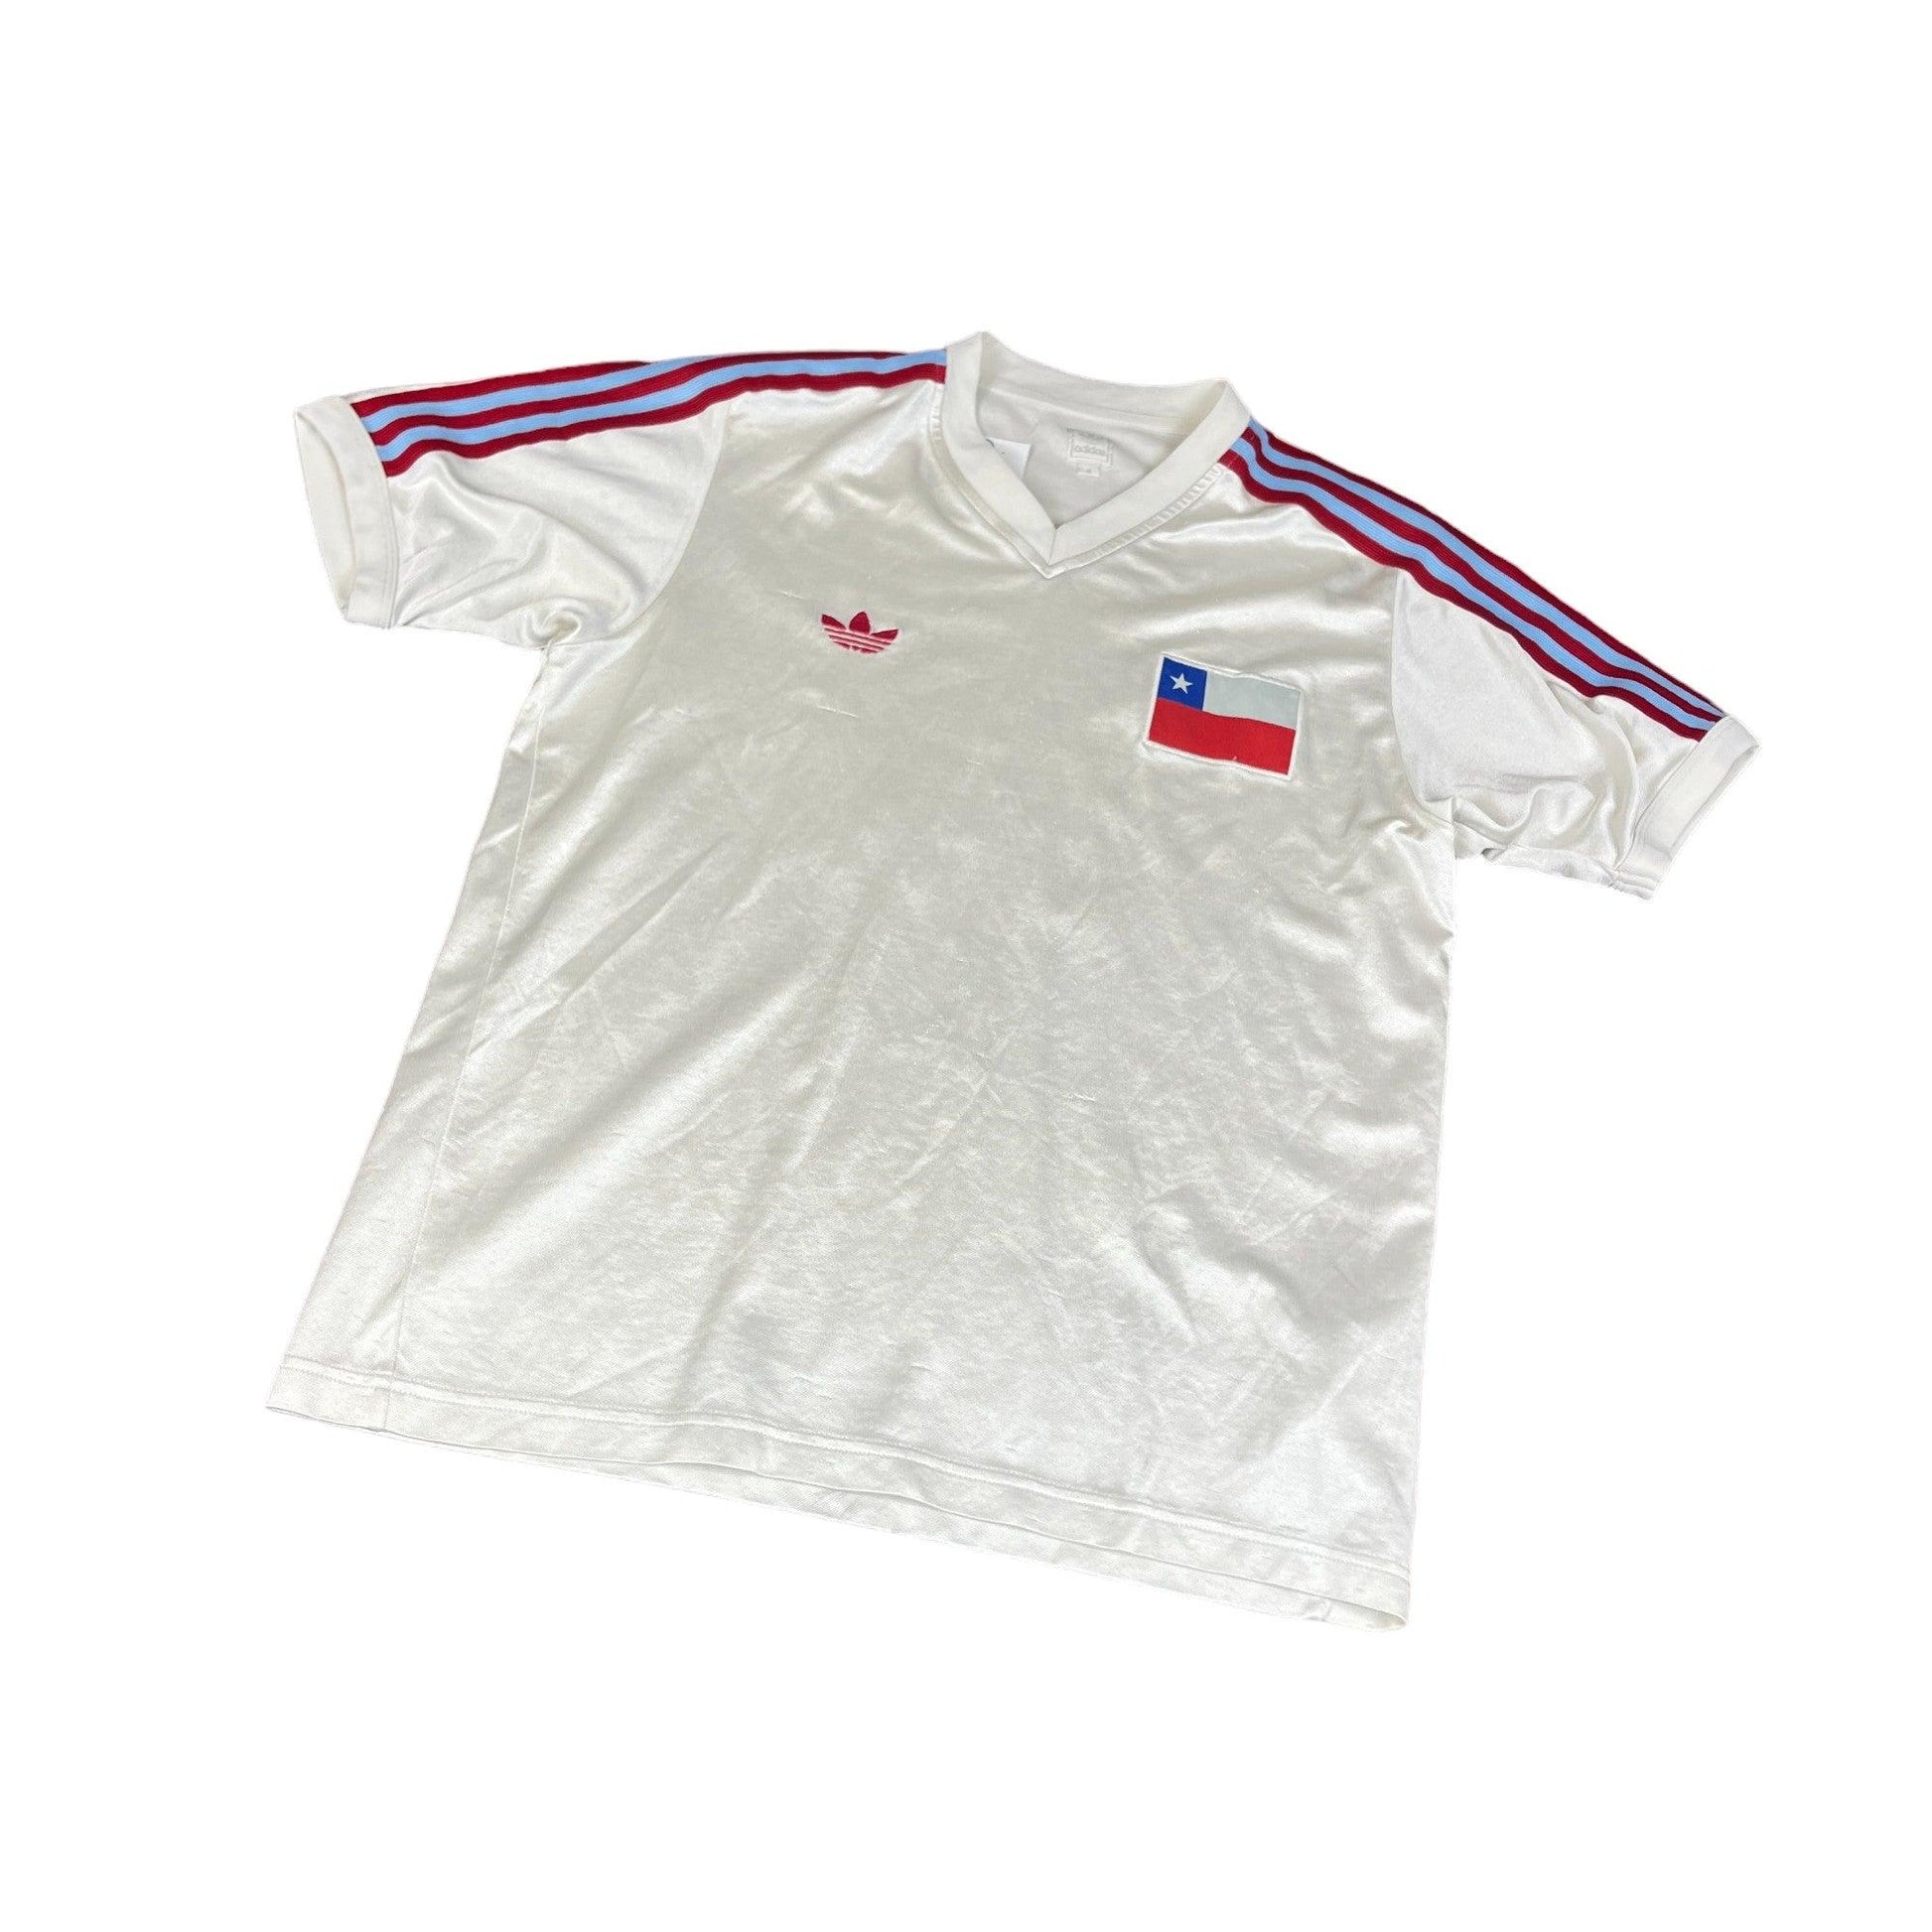 1982 White Adidas Chile Tee - Recommended Size - Small - The Streetwear Studio